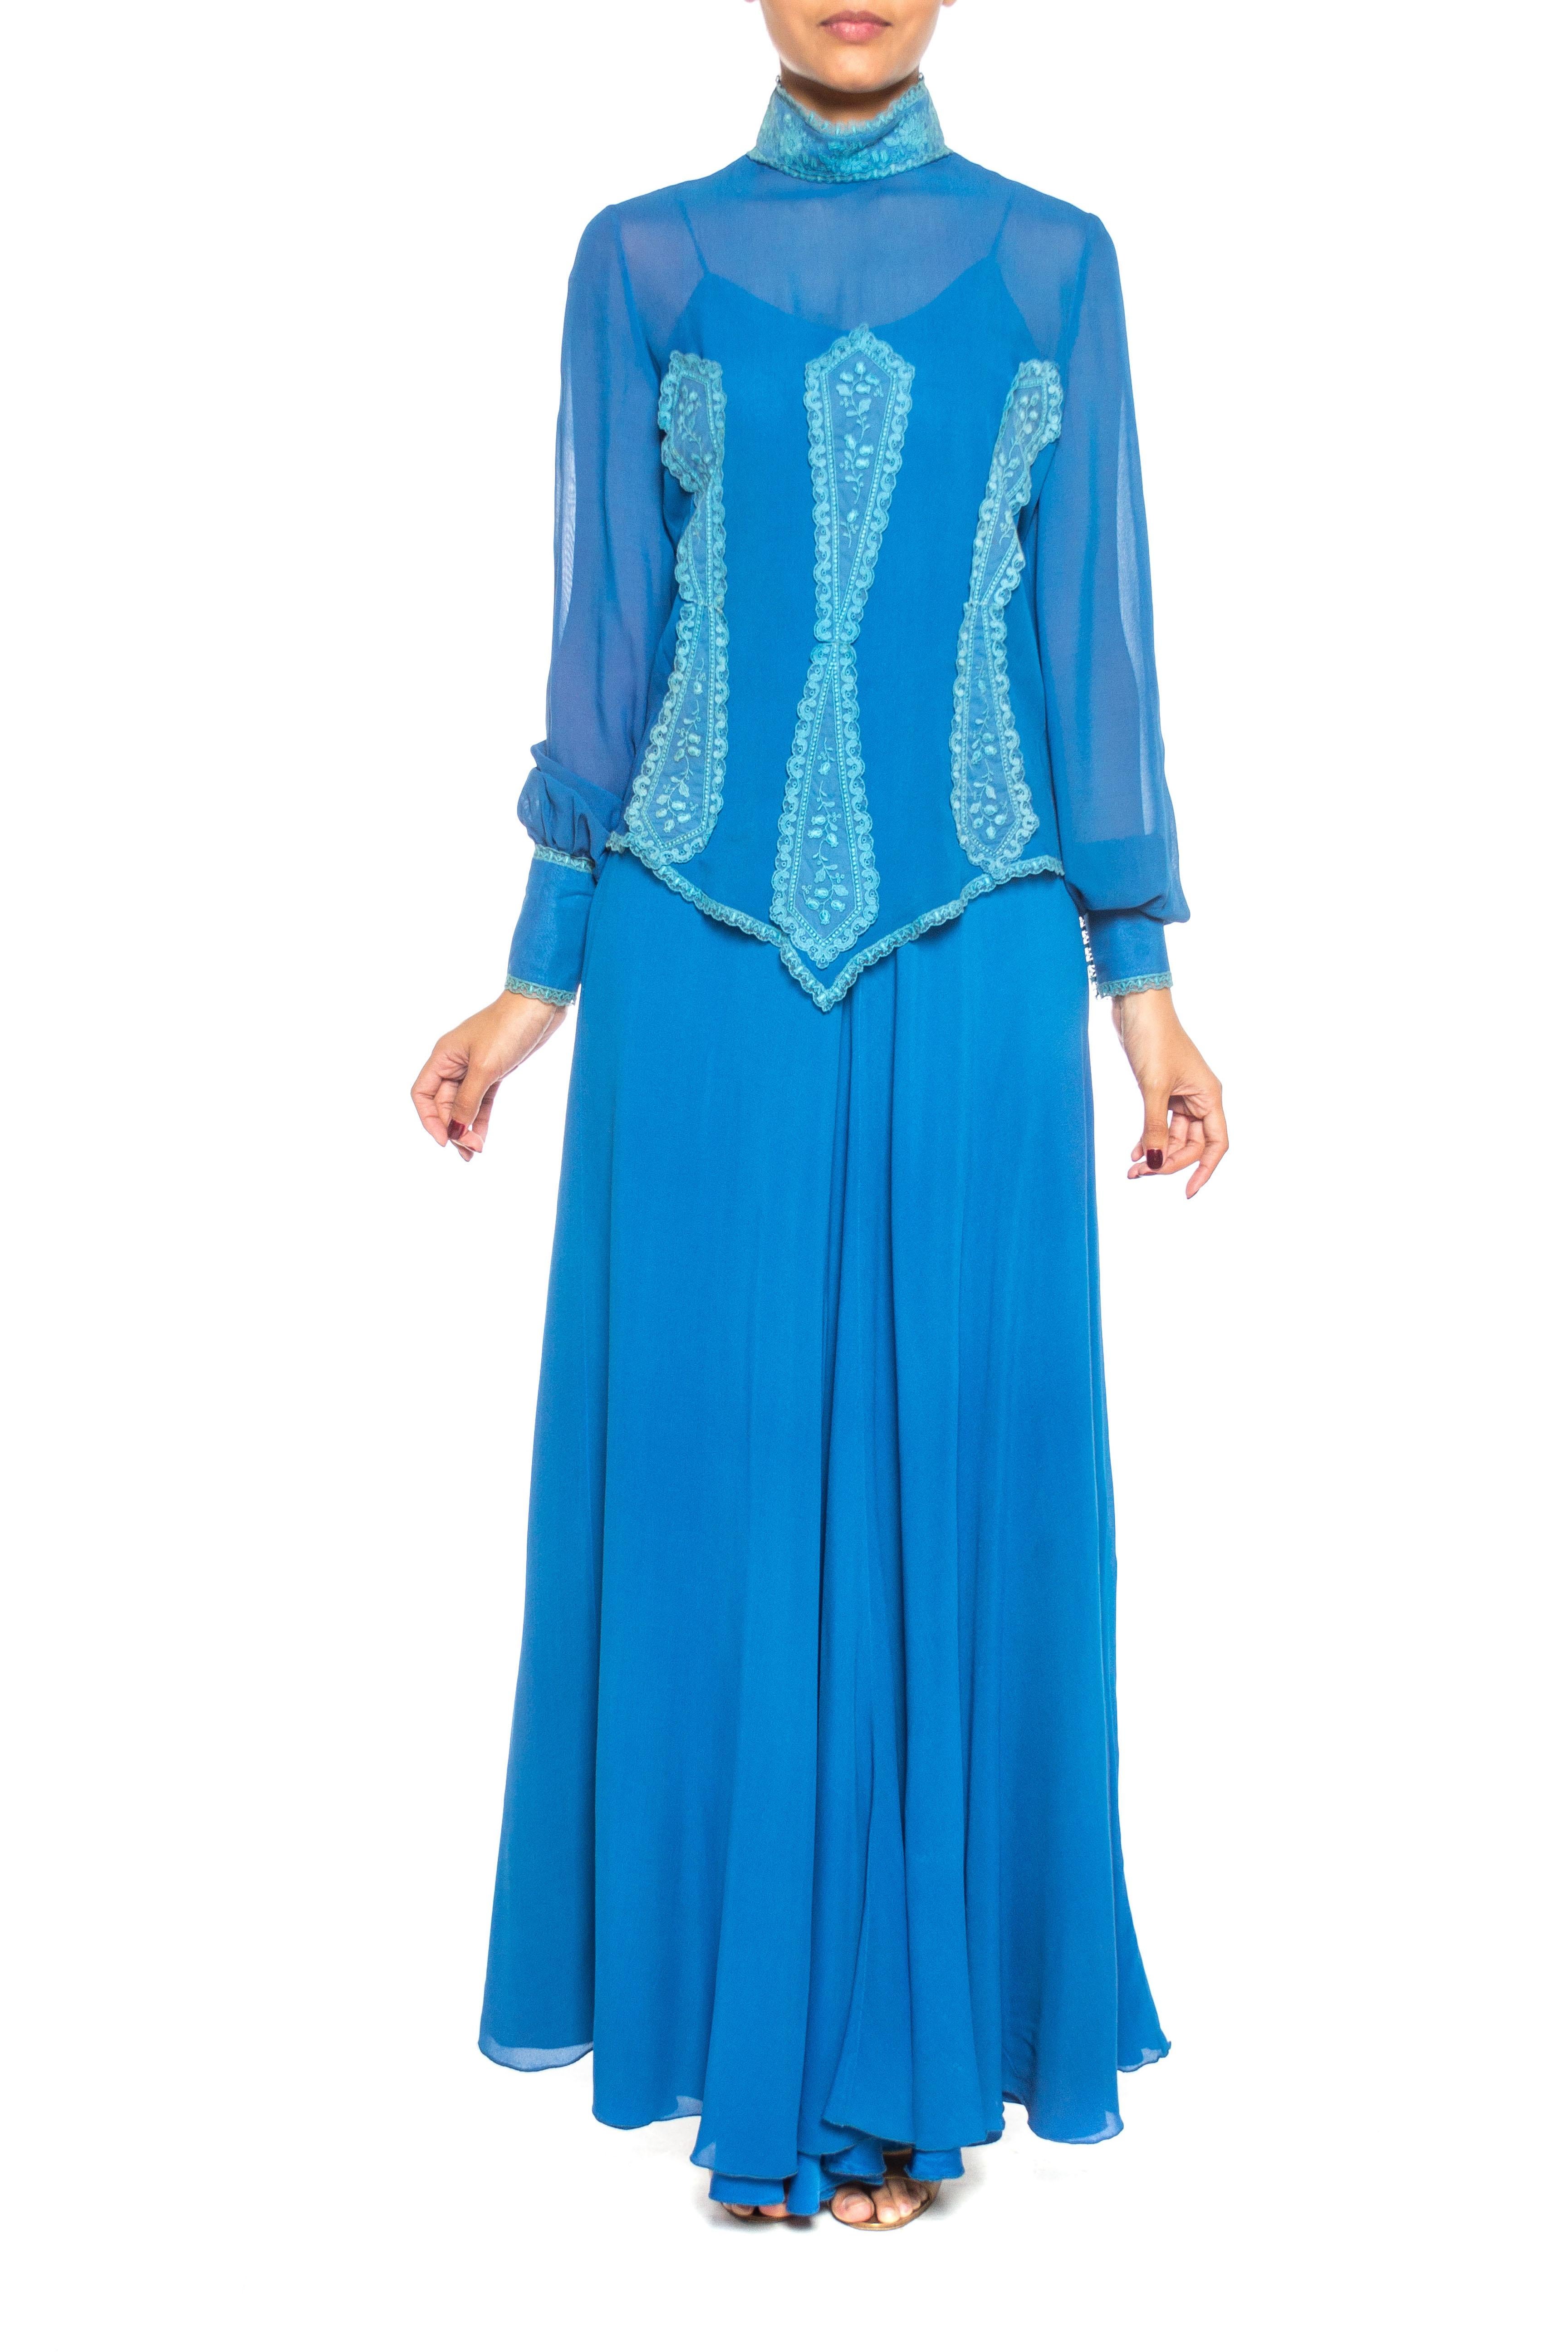 Hand made in Italy 1970S ENZO RUSSO COUTURE Blue Silk Chiffon Victorian Style Dress With Lace Blouse 